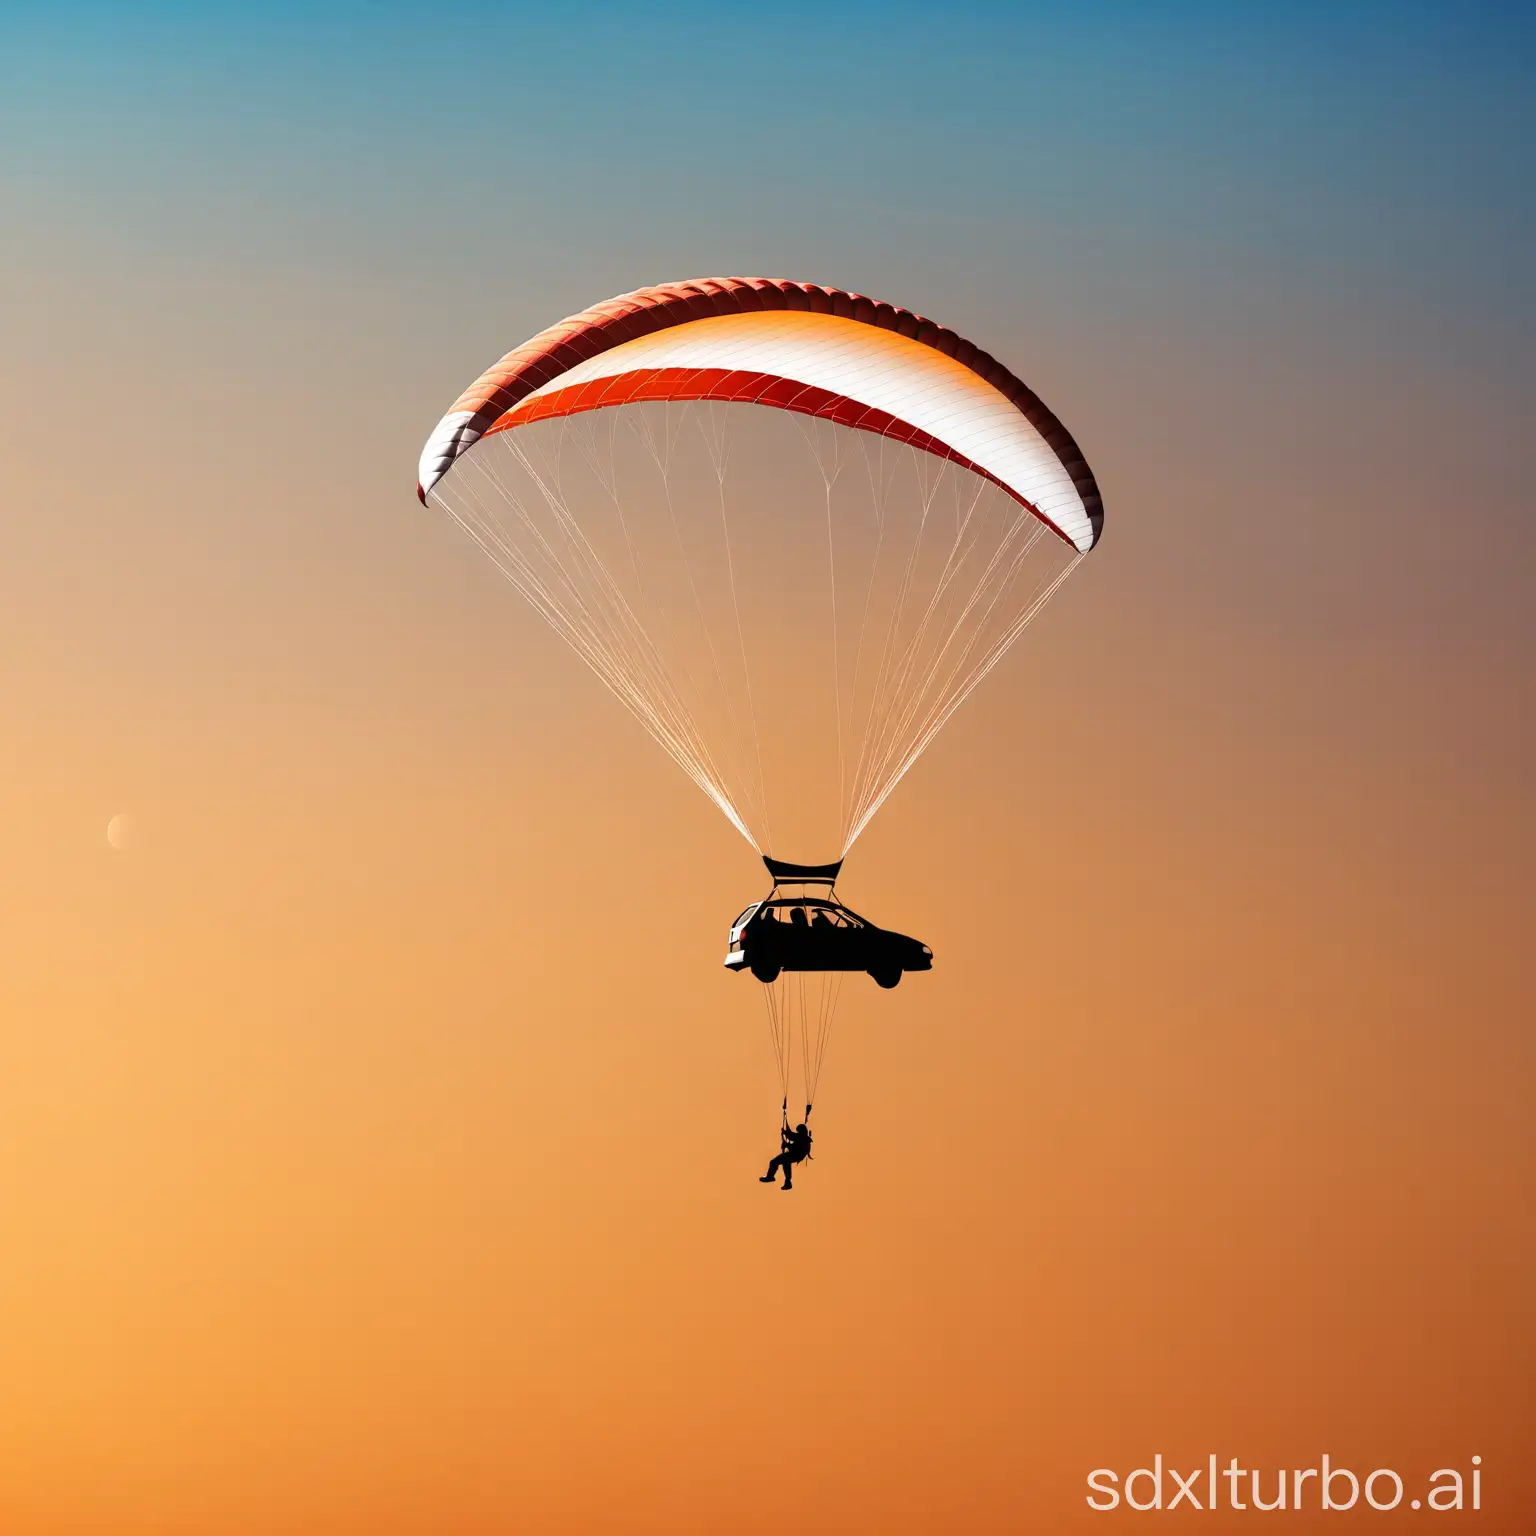 Paraglider in car on the way to Mars